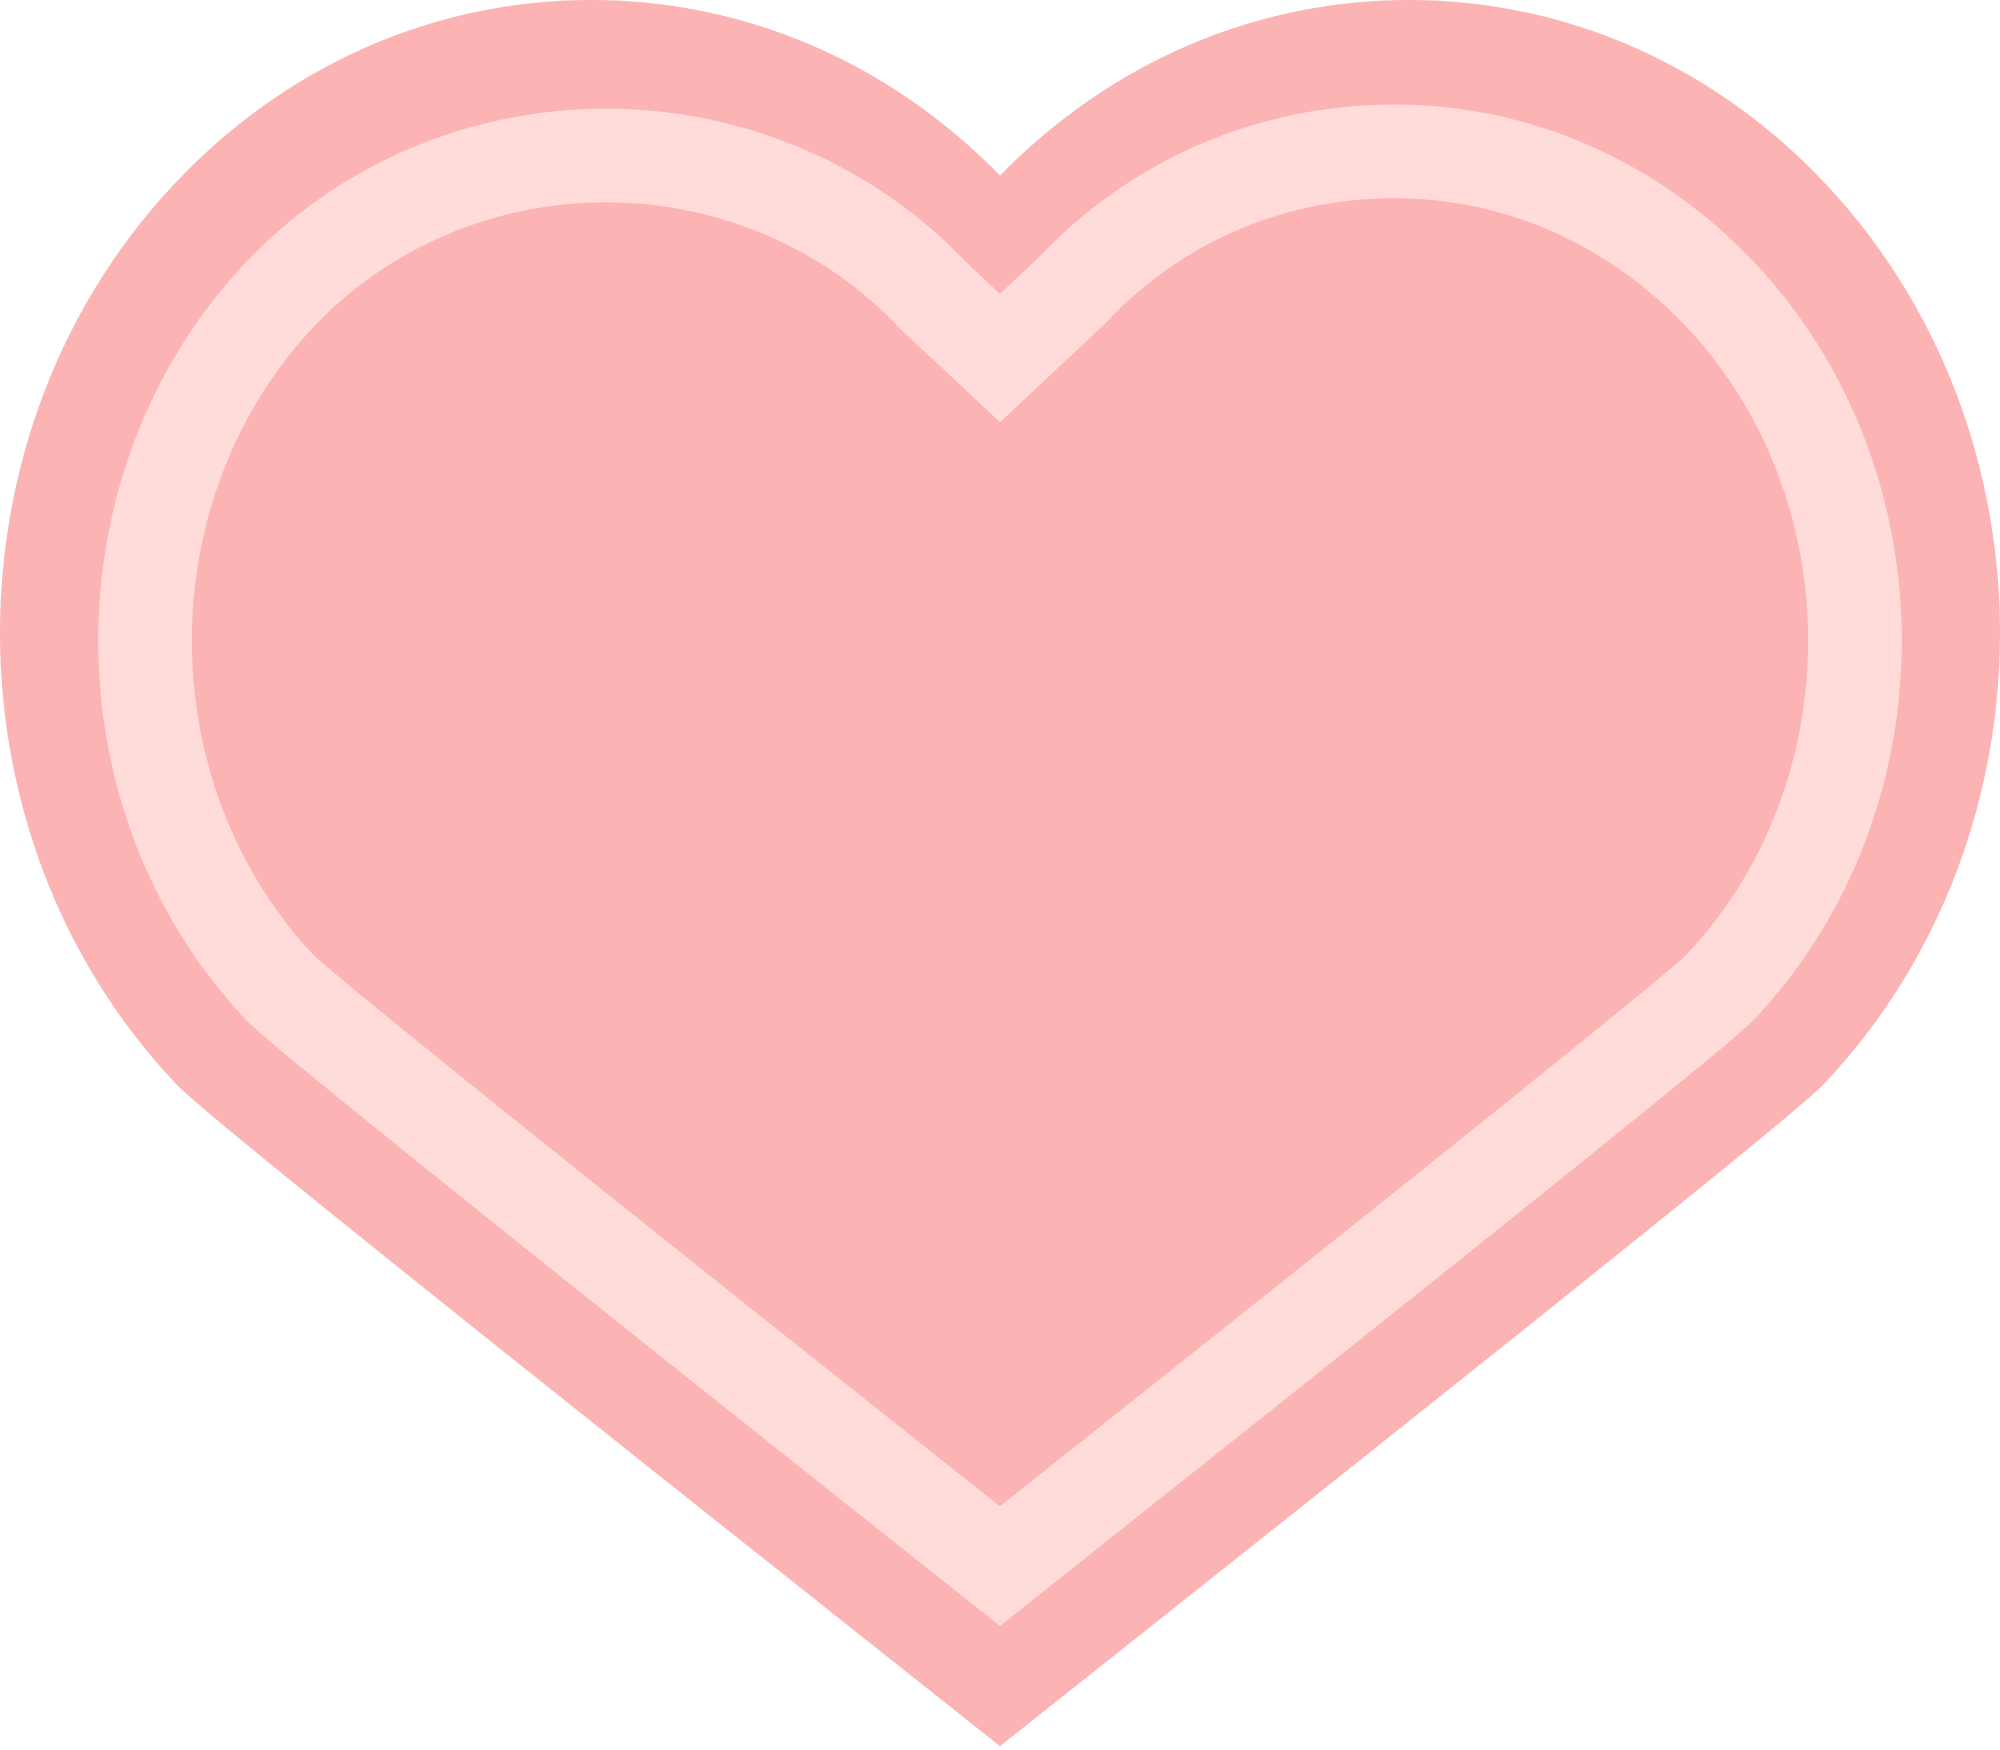 File:Heart icon.svg - Wikimedia Commons